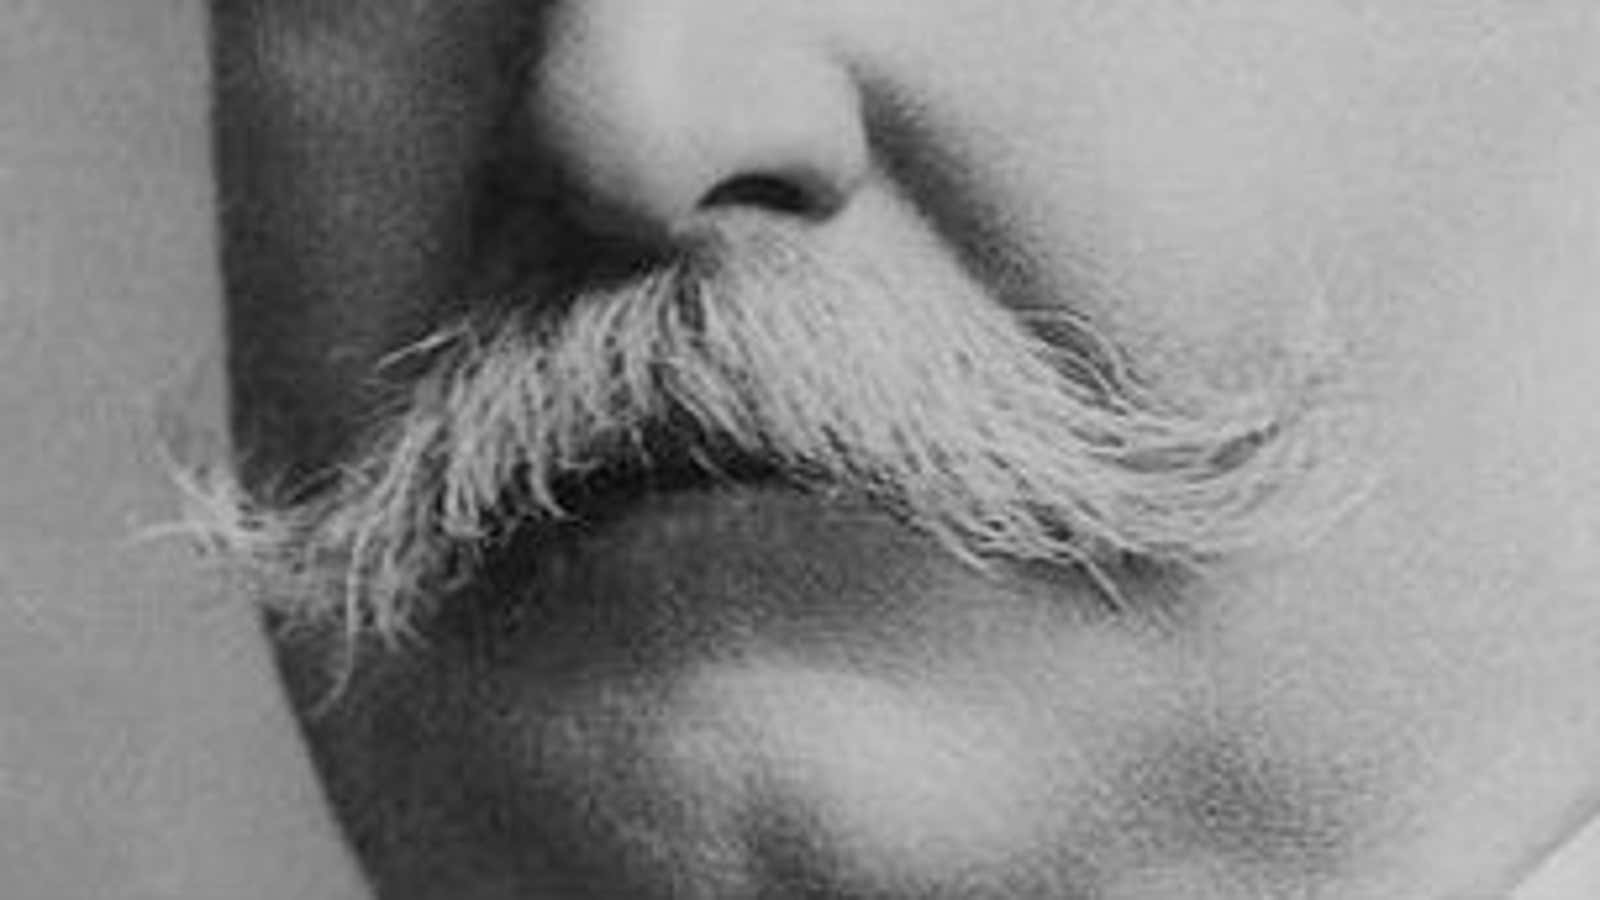 William Howard Taft’s was the last US president to sport facial hair.